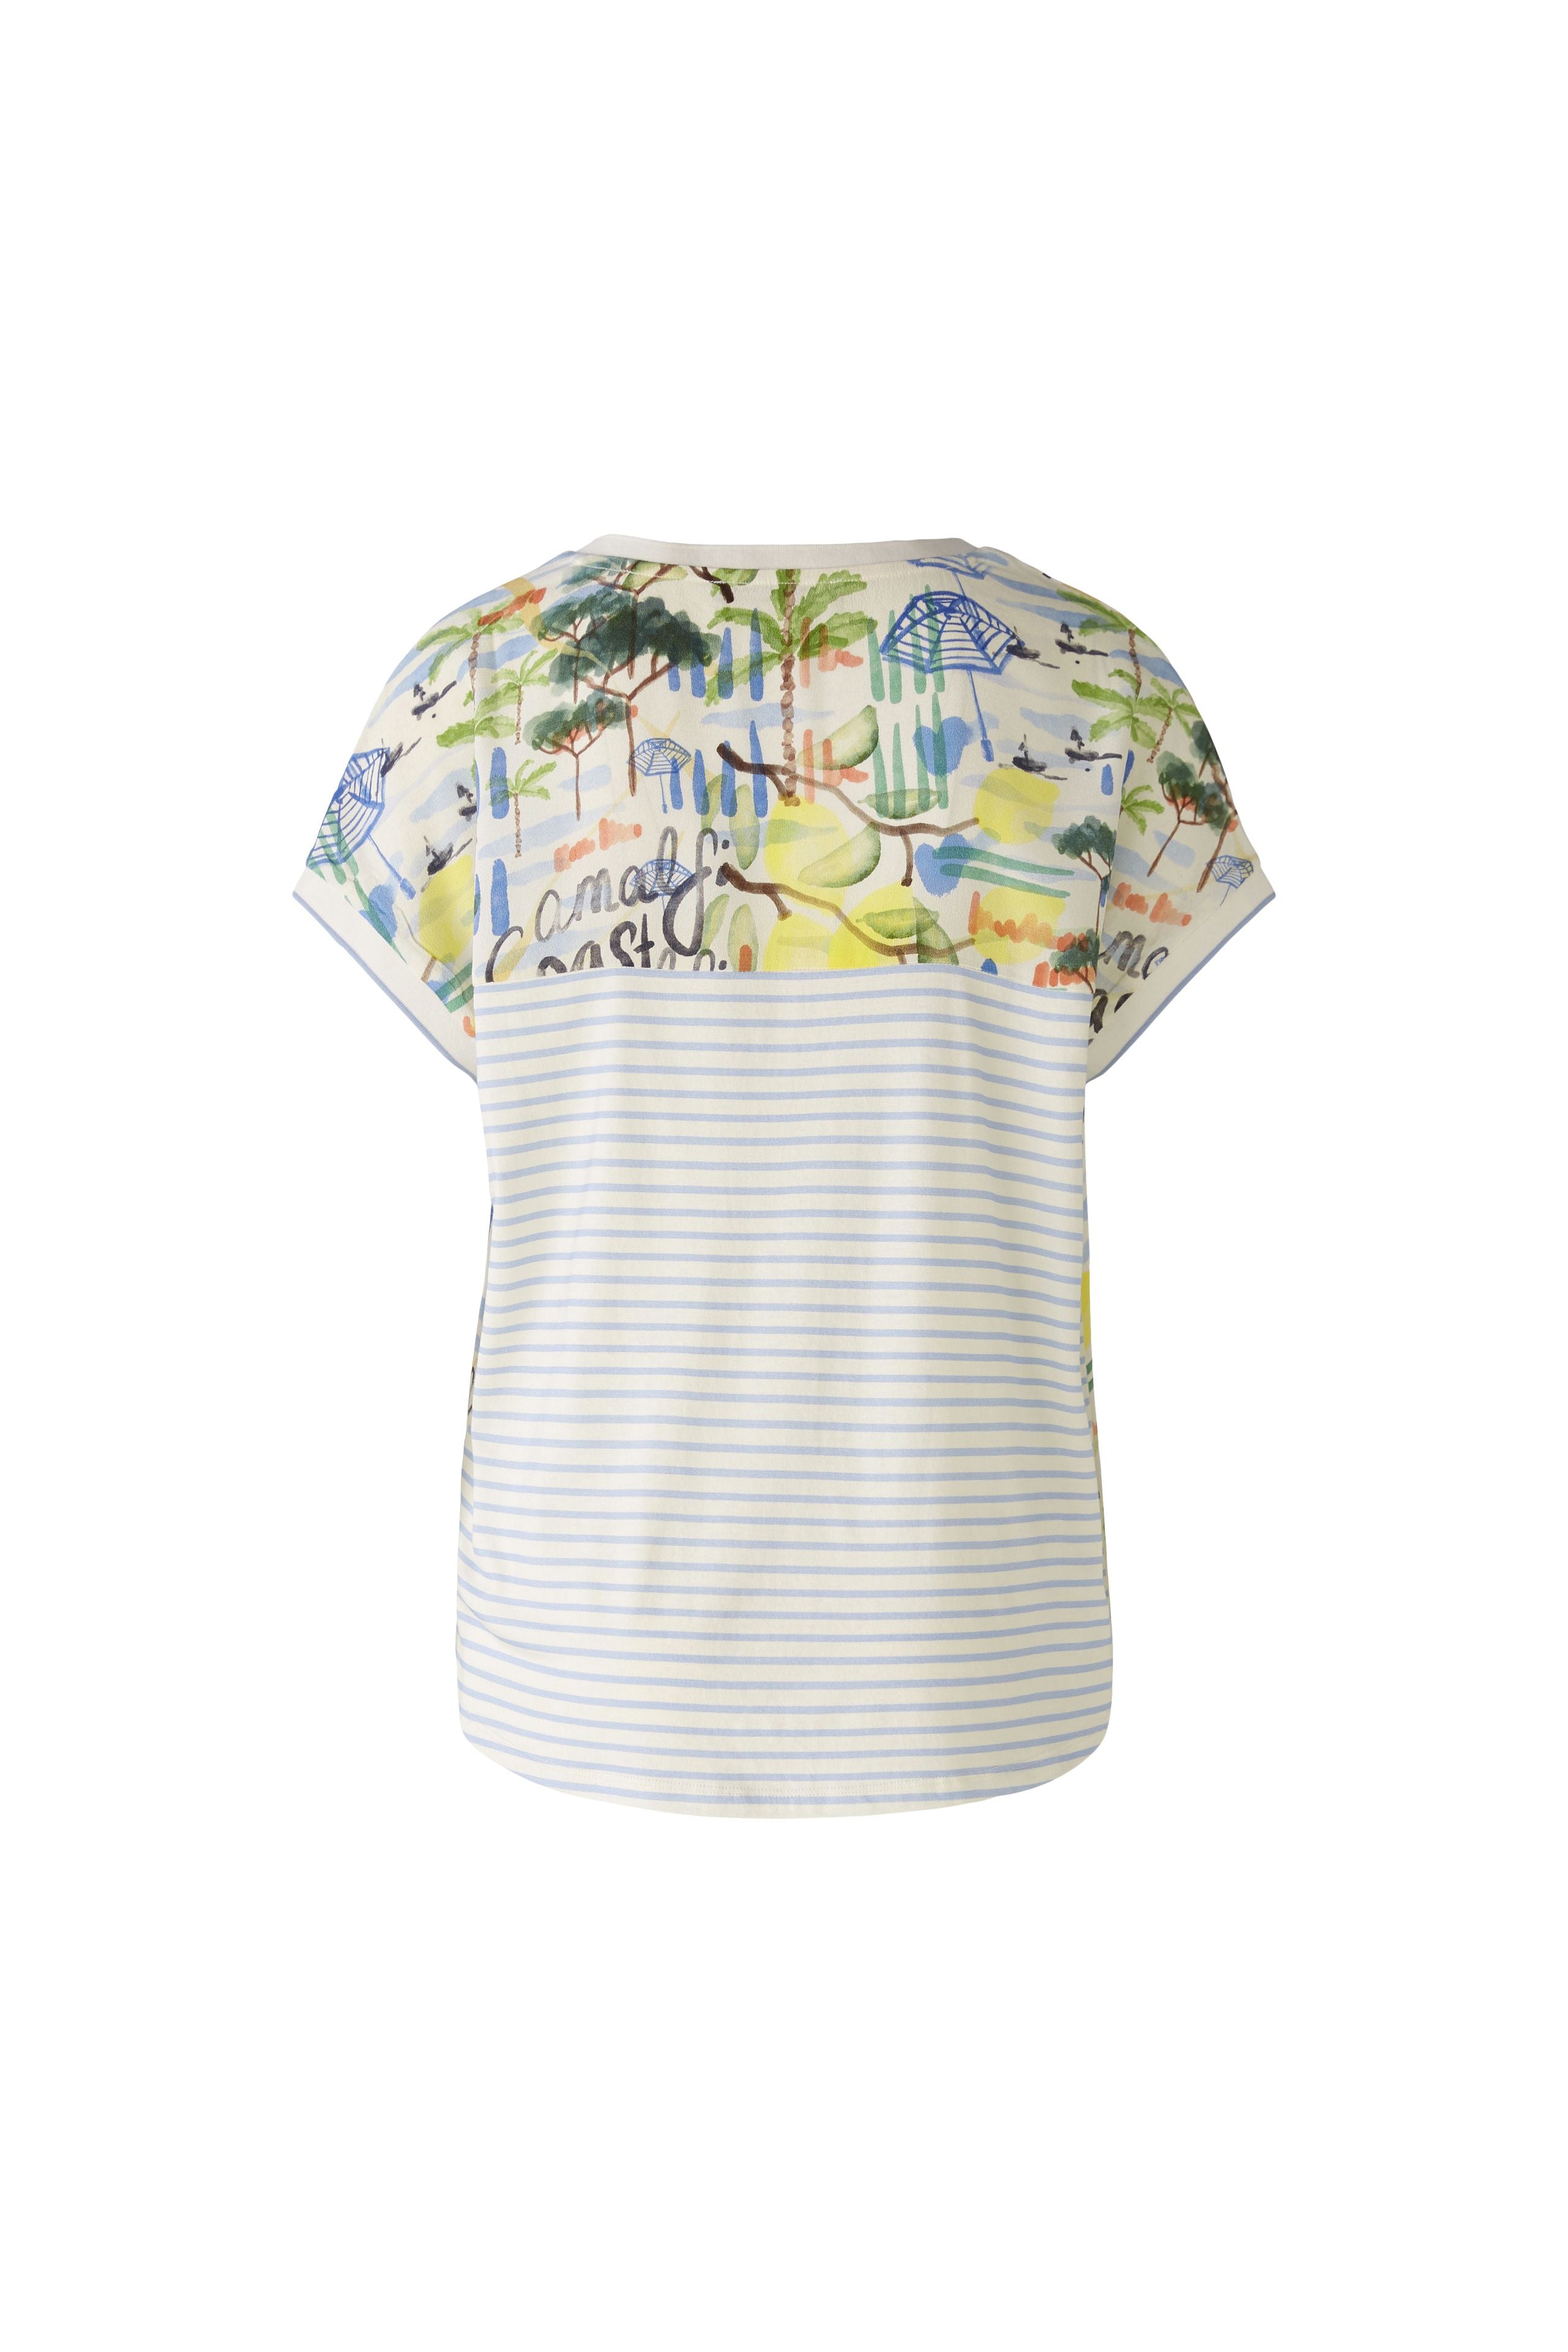 Riviera Inspired Top in White/Blue